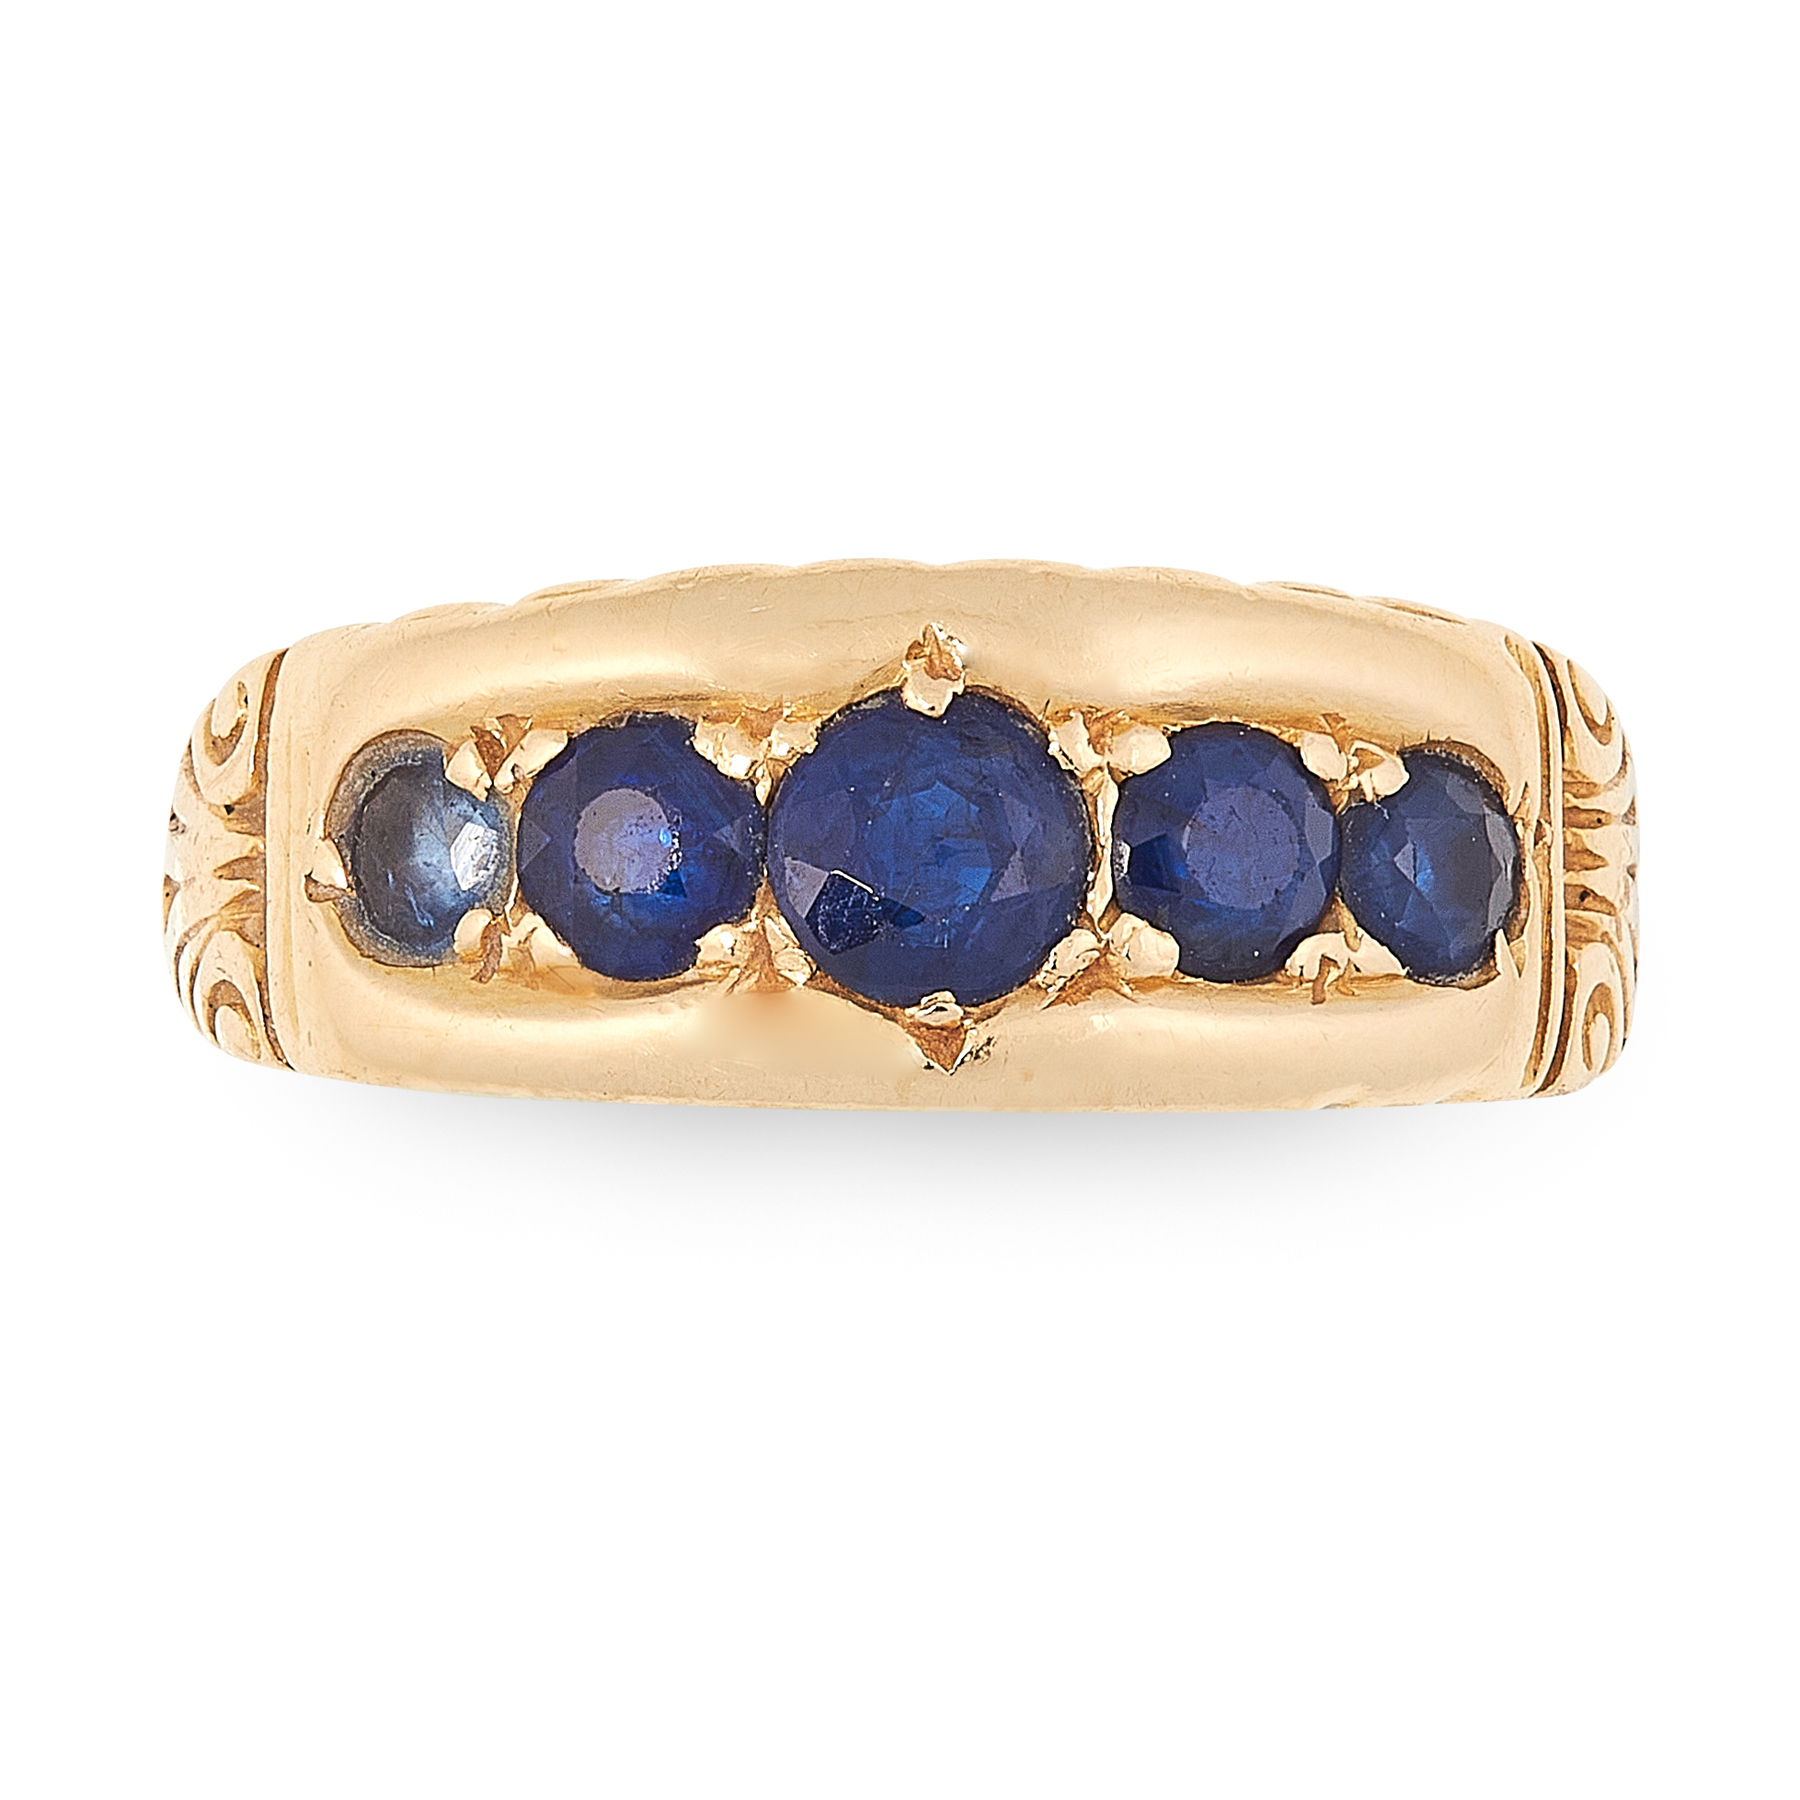 A SAPPHIRE FIVE STONE DRESS RING in 18ct yellow gold, set with a row of five graduated round cut